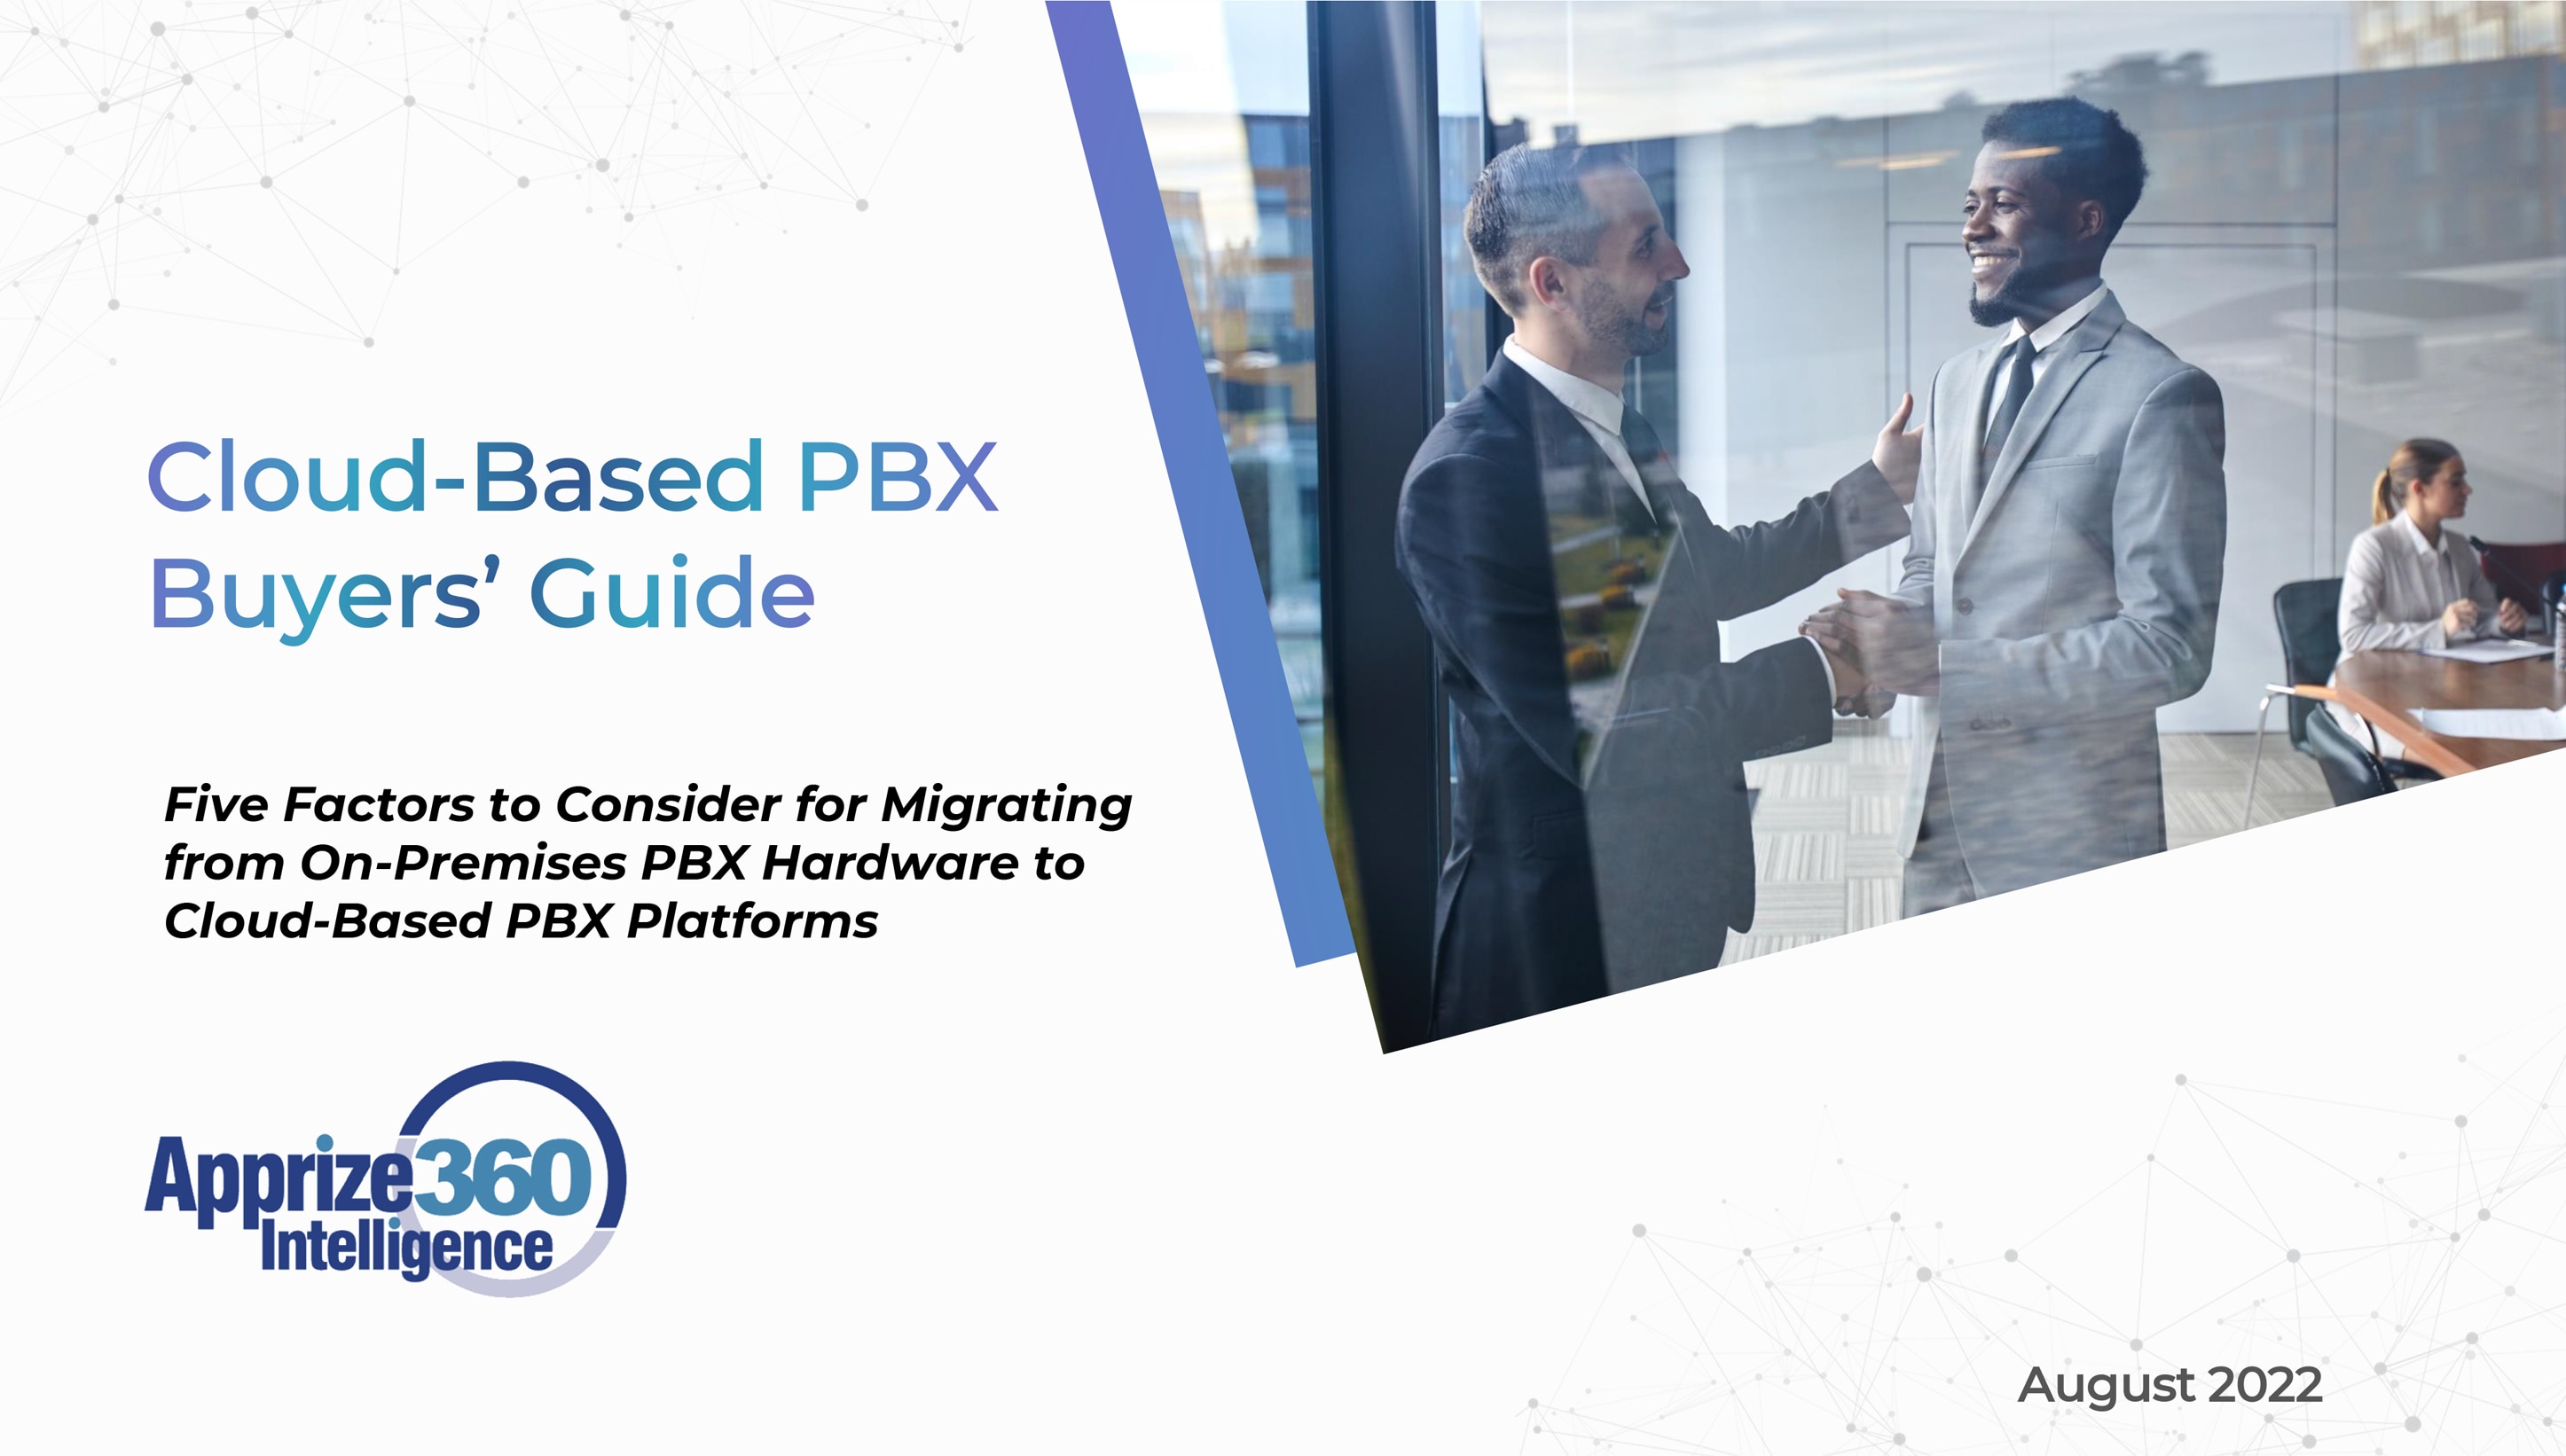 Cover of Apprize360’s Cloud-Based PBX Buyers’ Guide that surveys cloud offerings from leading PBX vendors